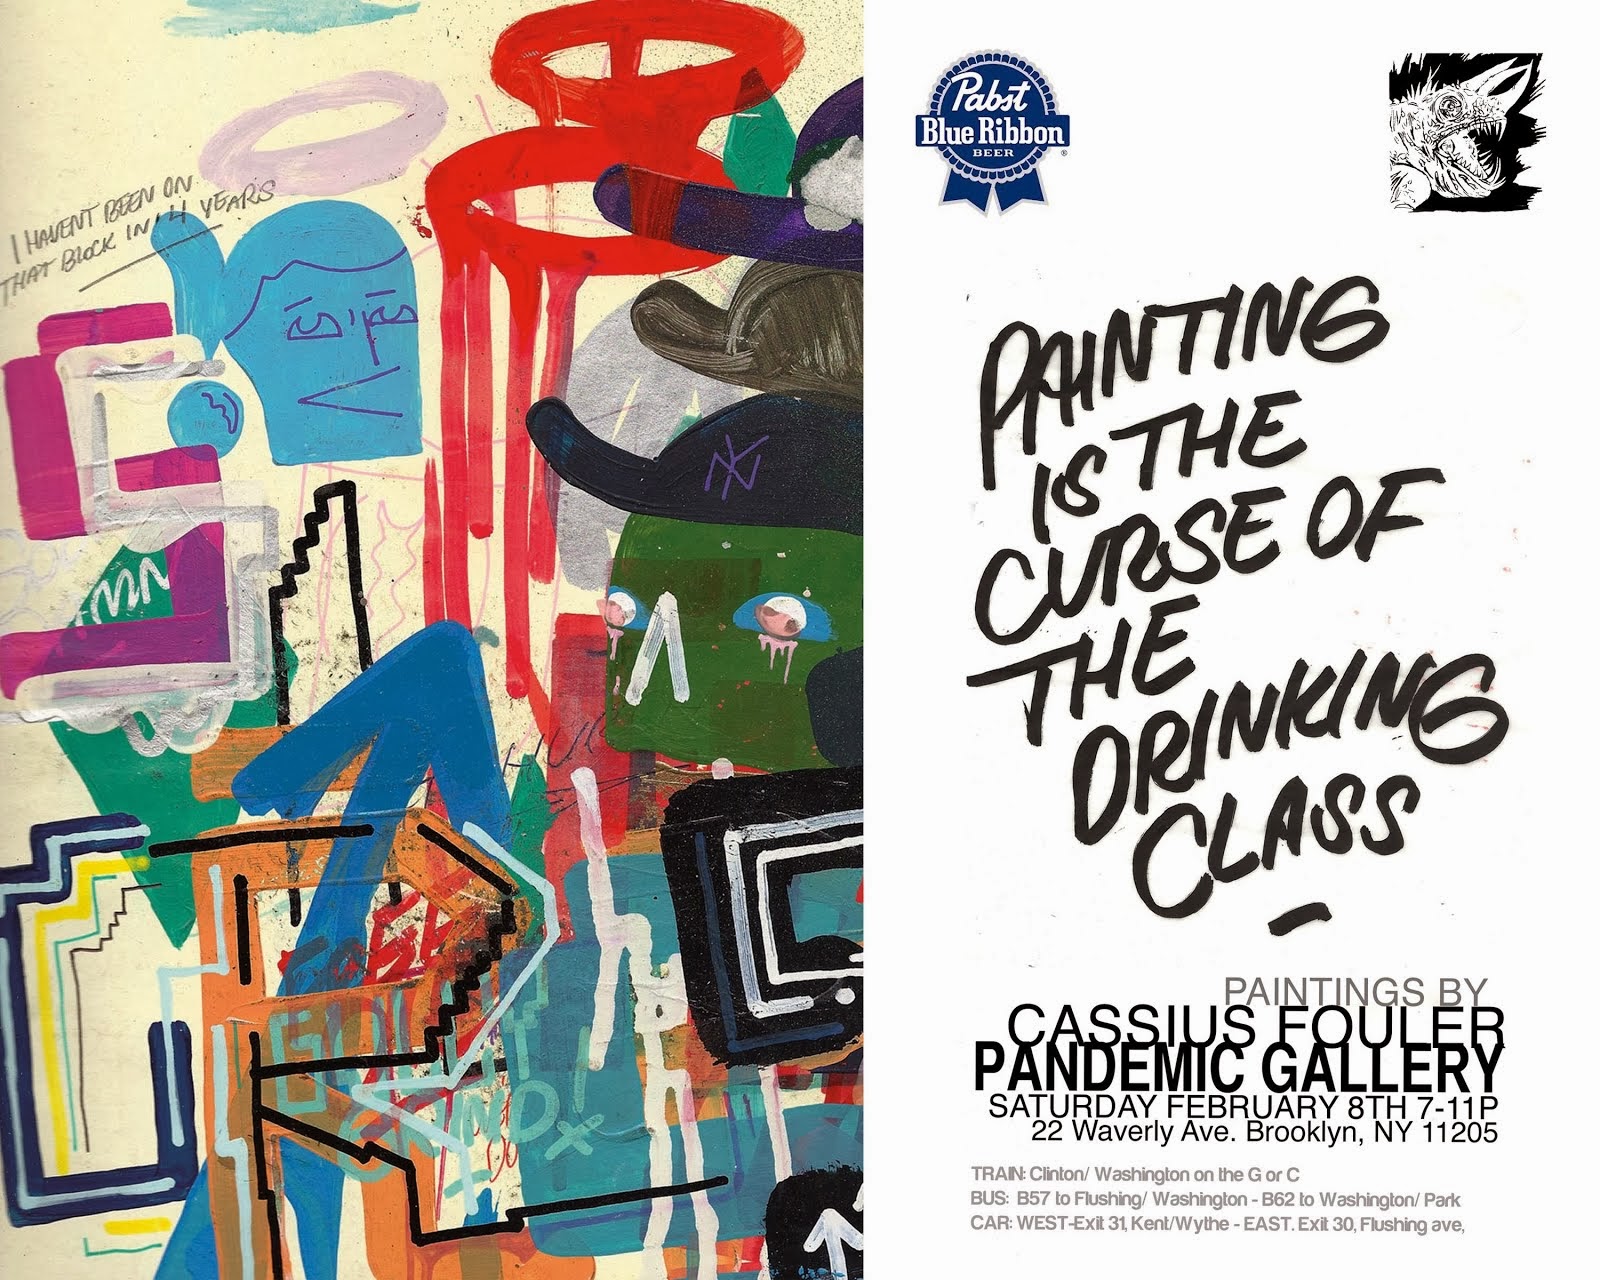 Cassius Fouler "Painting is the Curse of the drinking class"